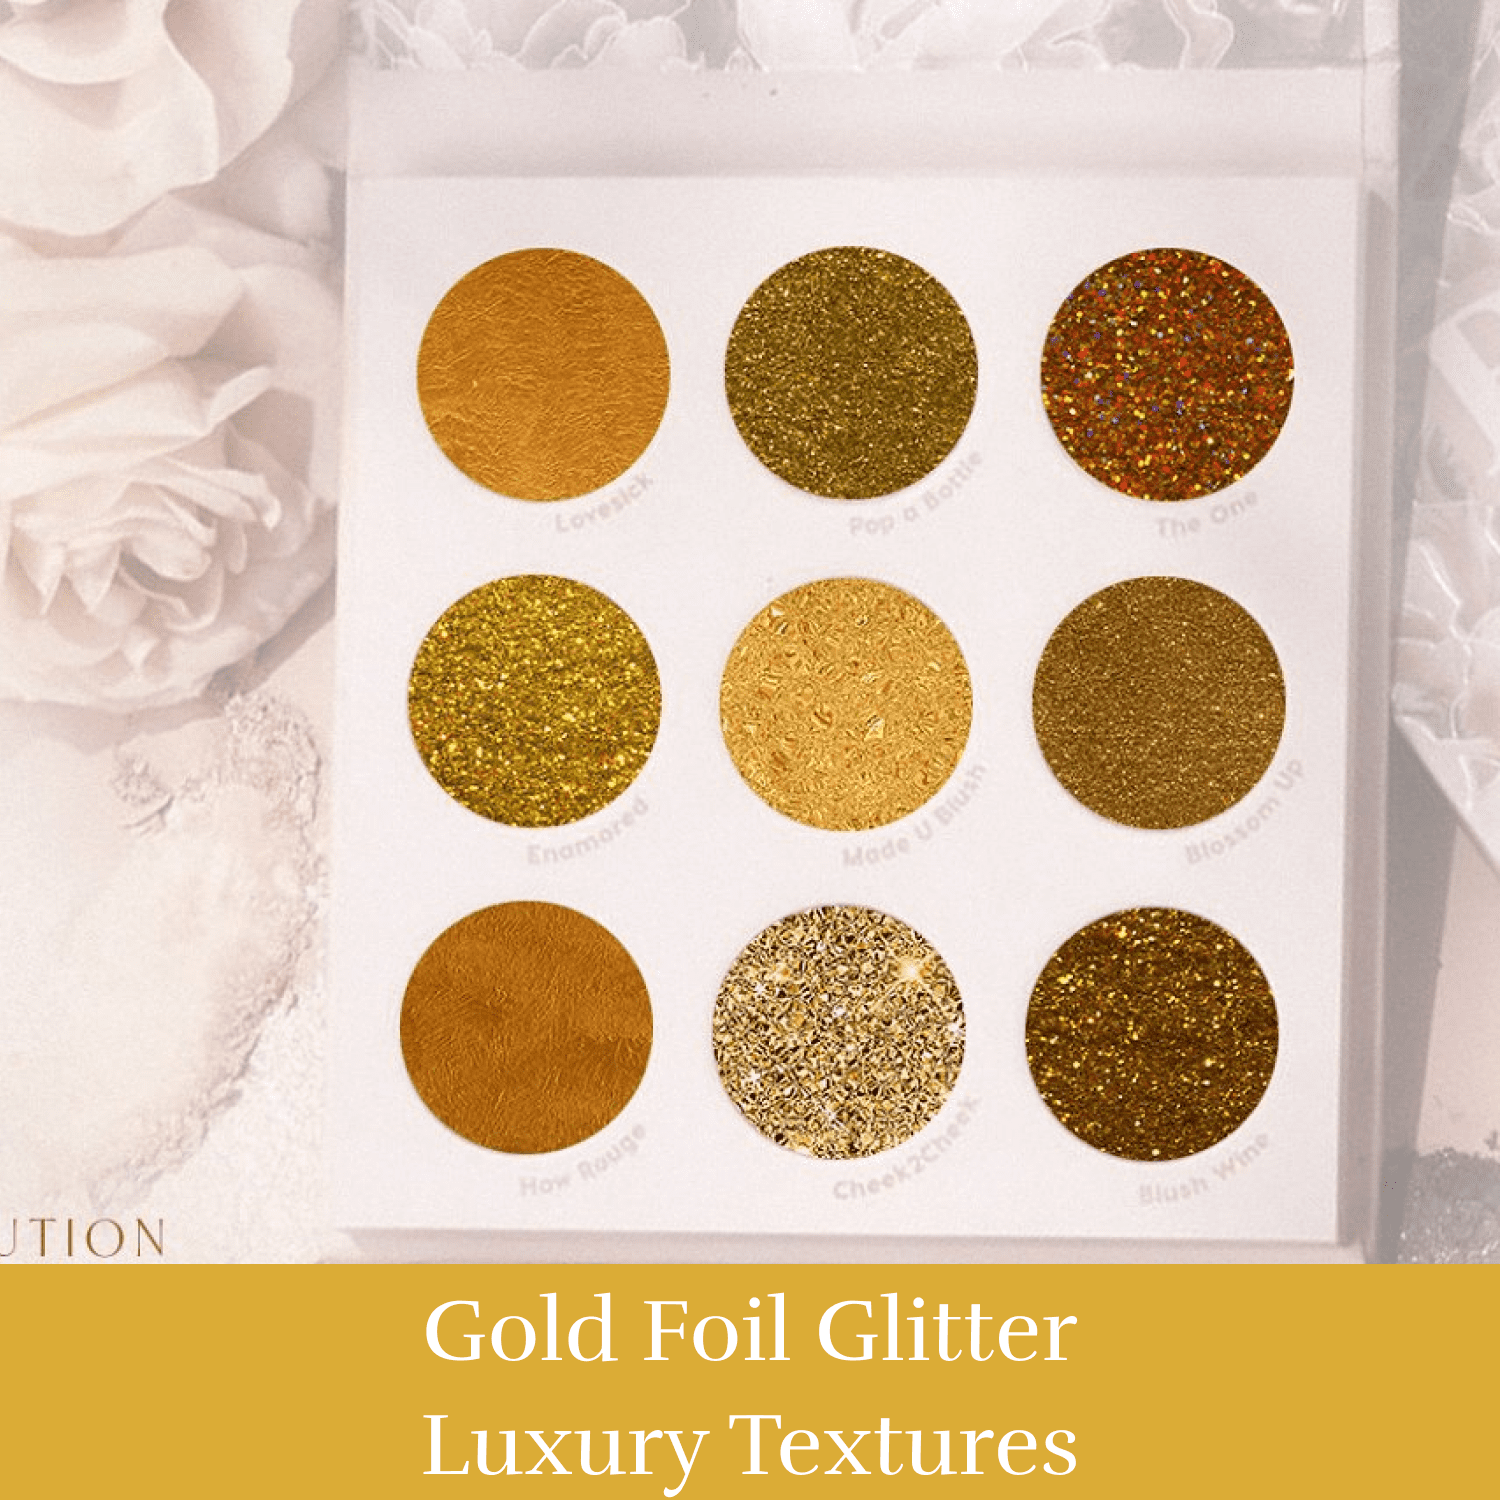 Gold Foil Glitter Luxury Textures cover.